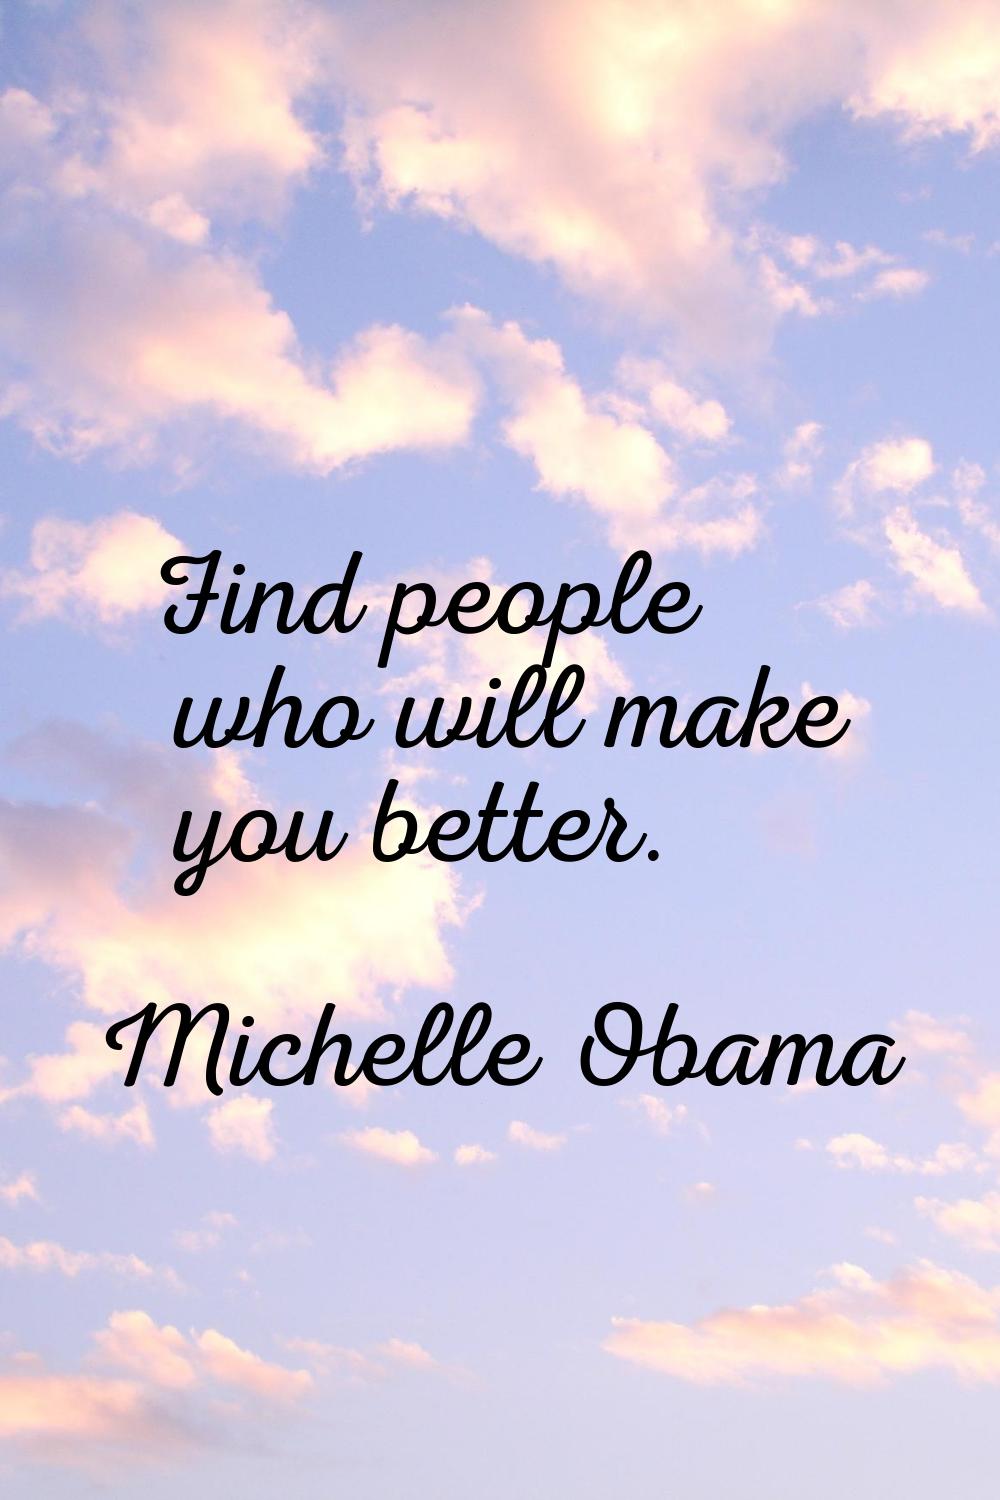 Find people who will make you better.